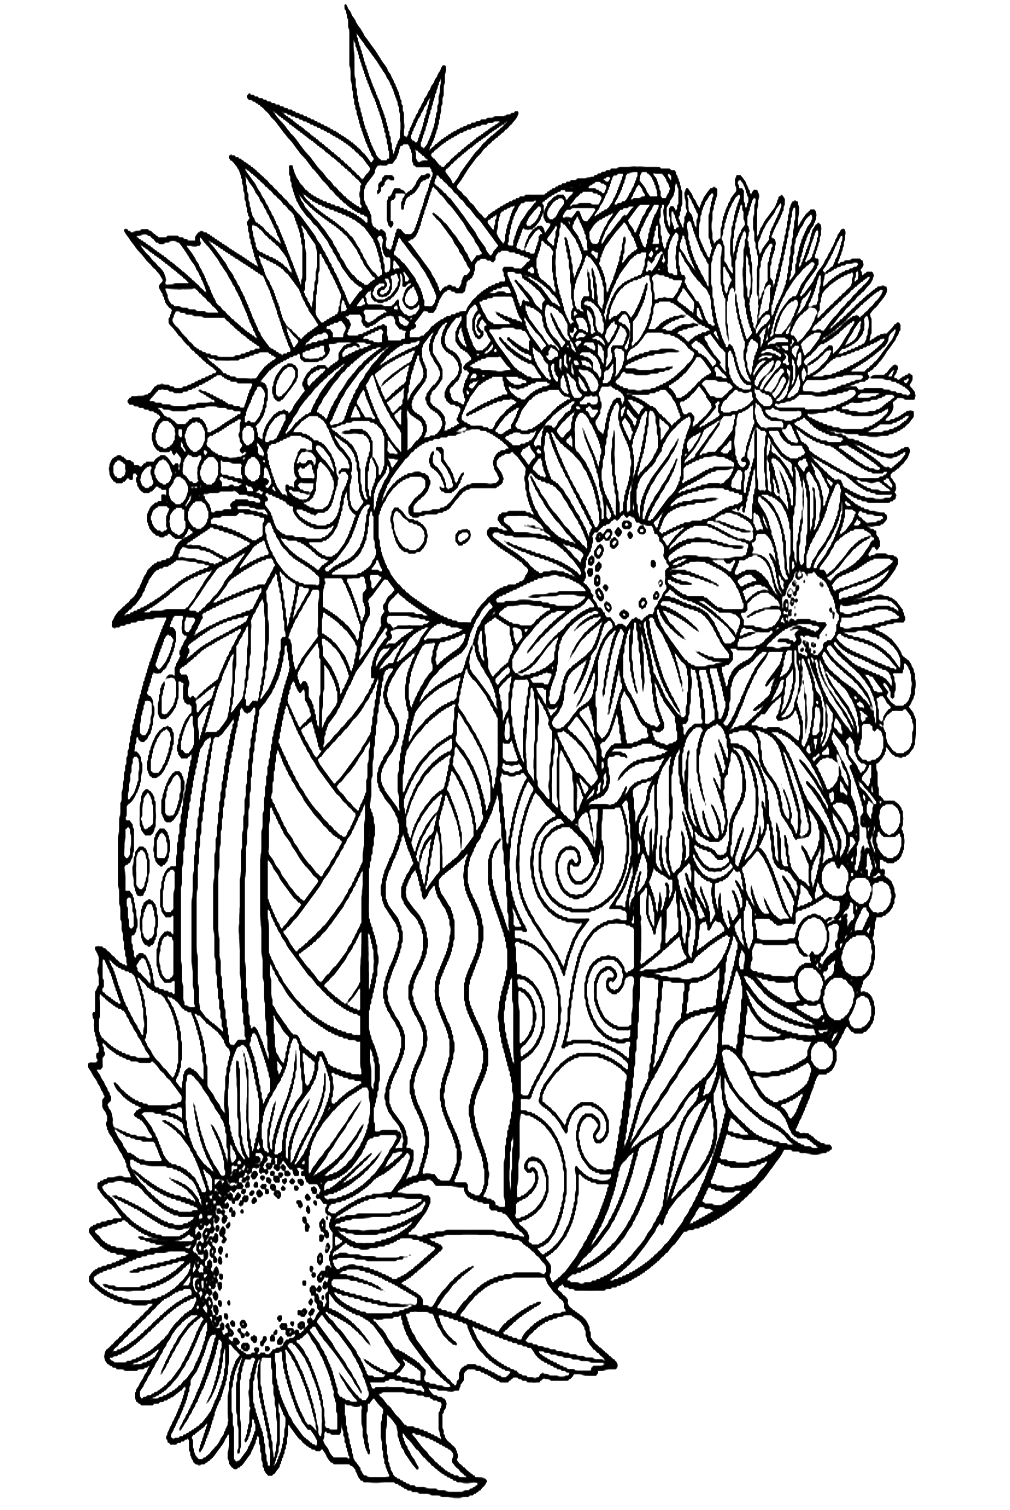 Pretty Halloween Pumpkin And Sunflowers Coloring Pages